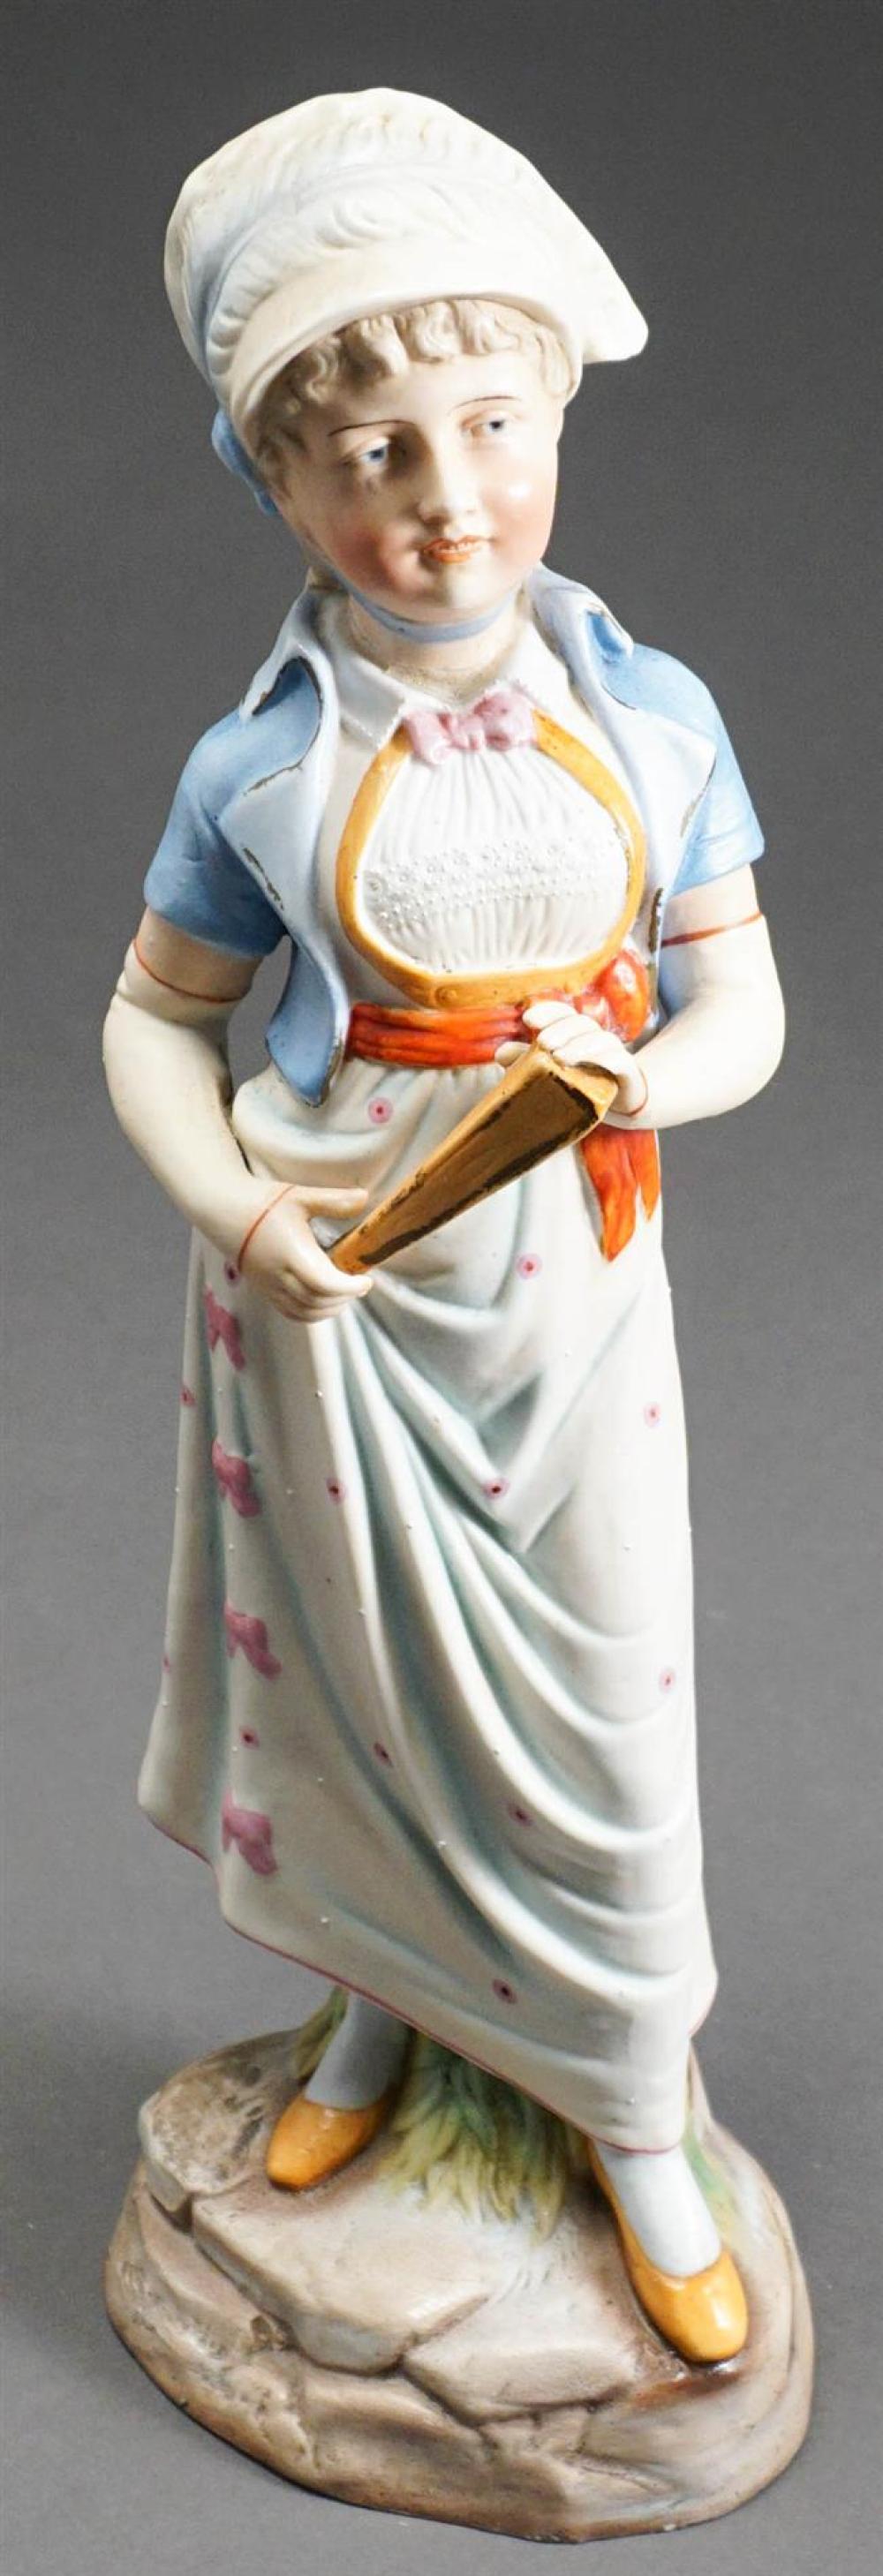 GERMAN BISQUE FIGURE OF GIRL WITH